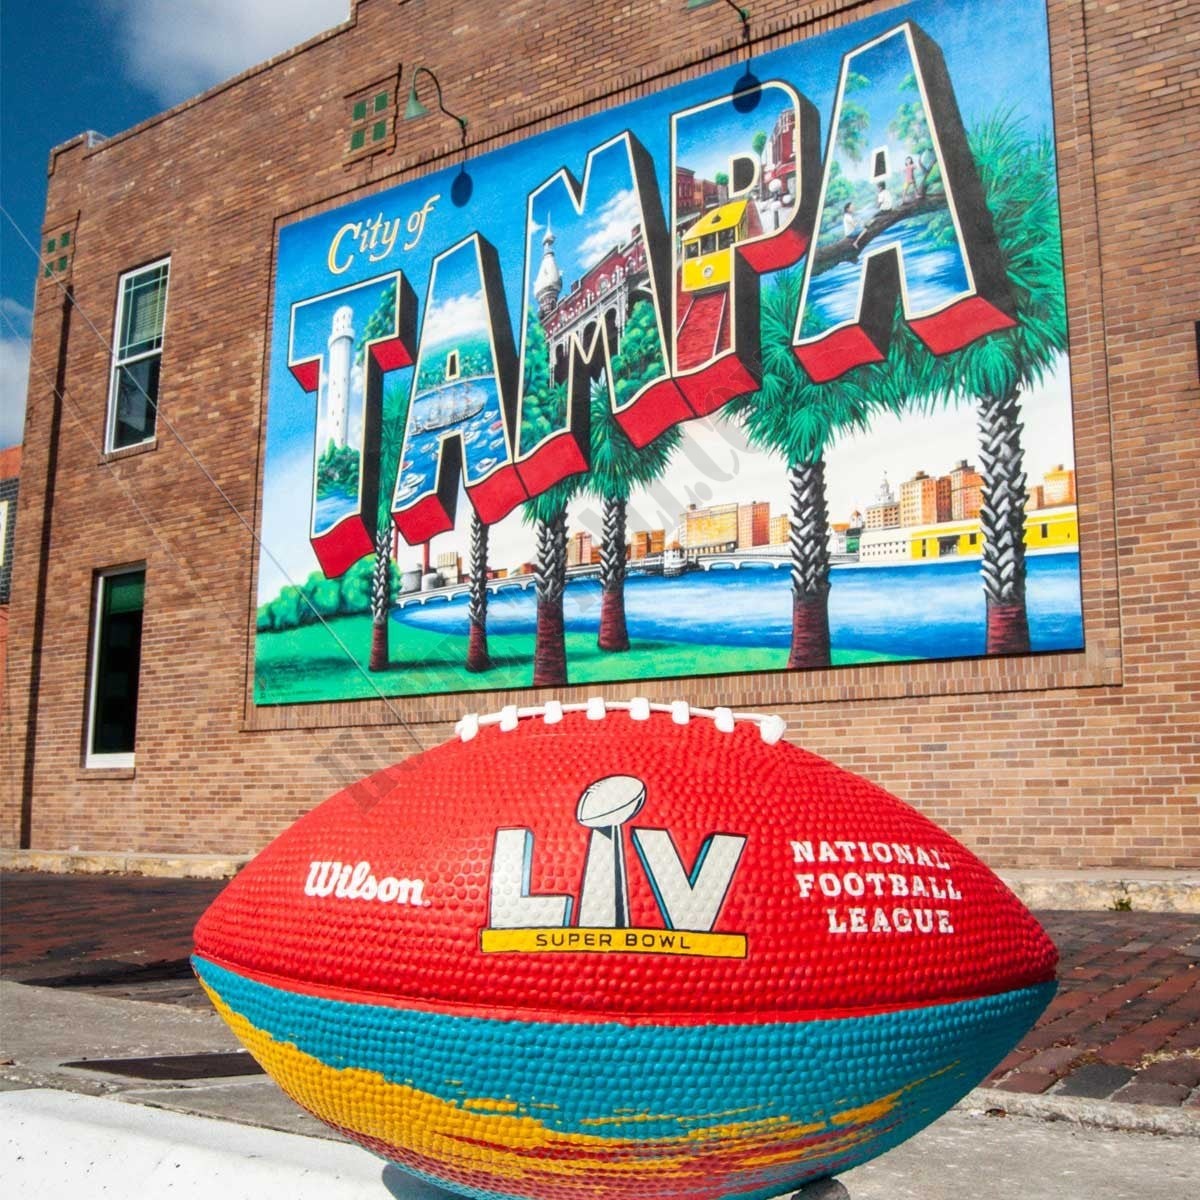 Super Bowl LV Junior All-Weather Football ● Wilson Promotions - -2